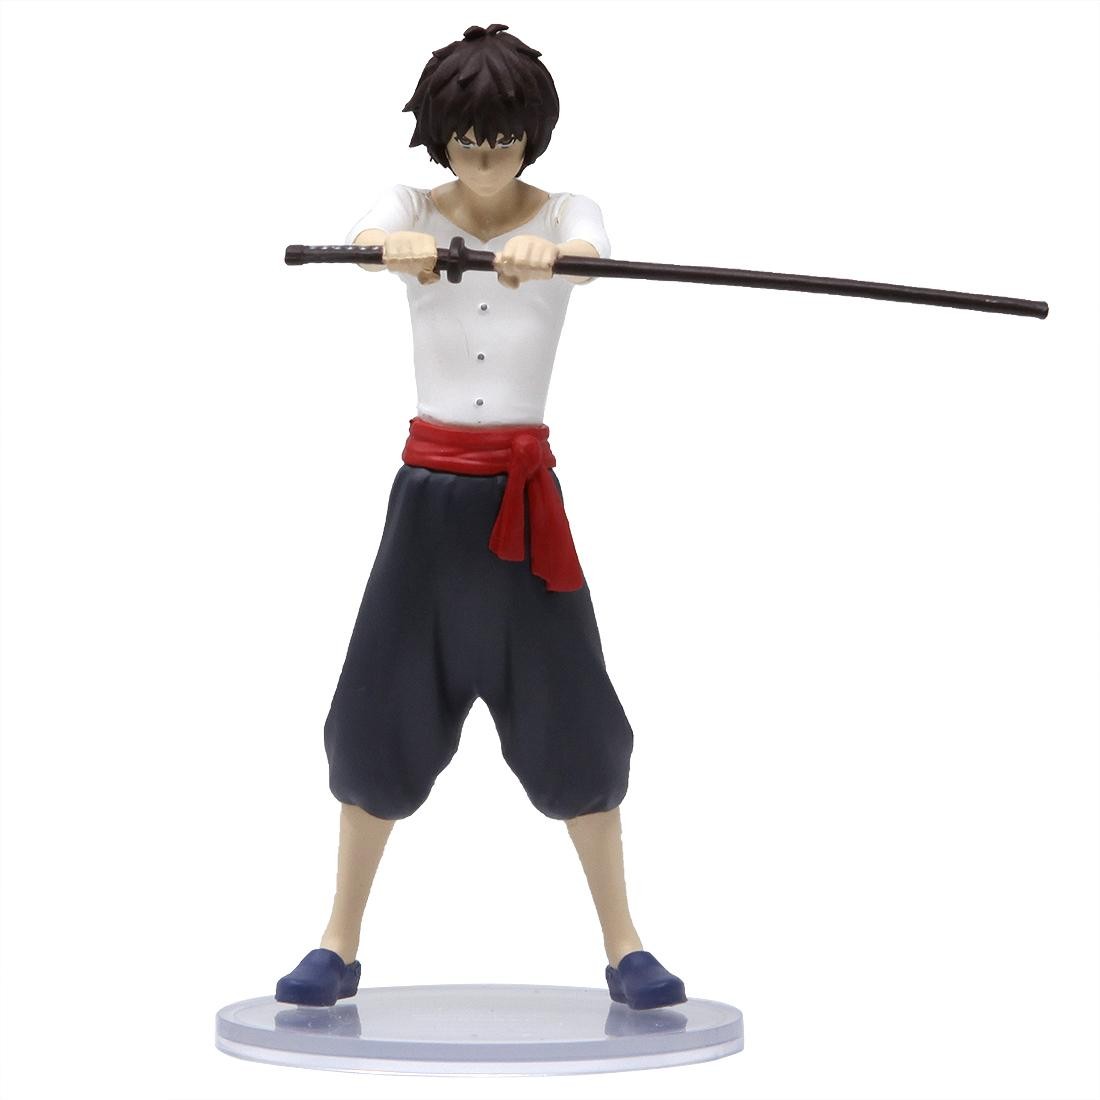 Medicom UDF Studio Chizu Series 2 The Boy And The Beast Kyuta Young Adult Ver. Ultra Detail Figure (white)